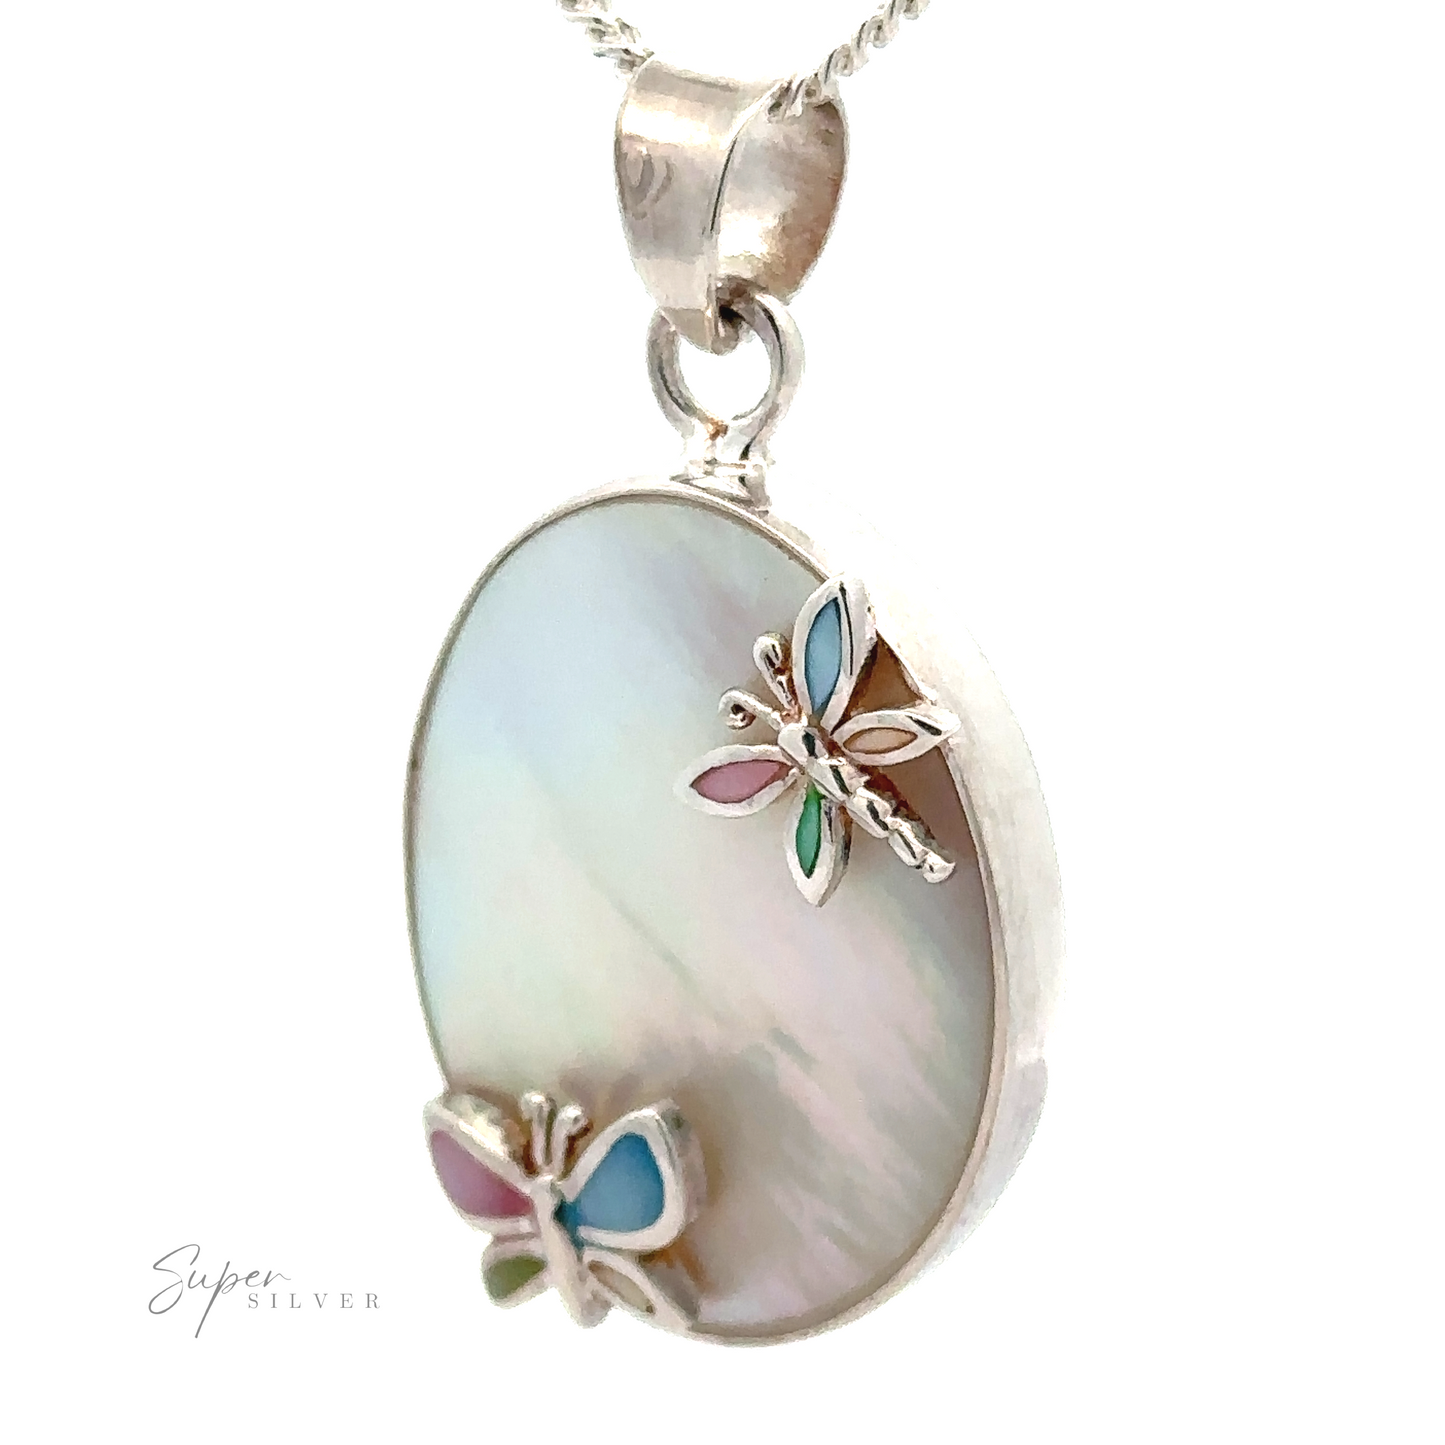 
                  
                    A Mother of Pearl Pendant with Butterflies and Dragonflies featuring an oval mother-of-pearl inlay adorned with small, colorful butterfly and dragonfly accents. The pendant hangs elegantly from a silver chain.
                  
                